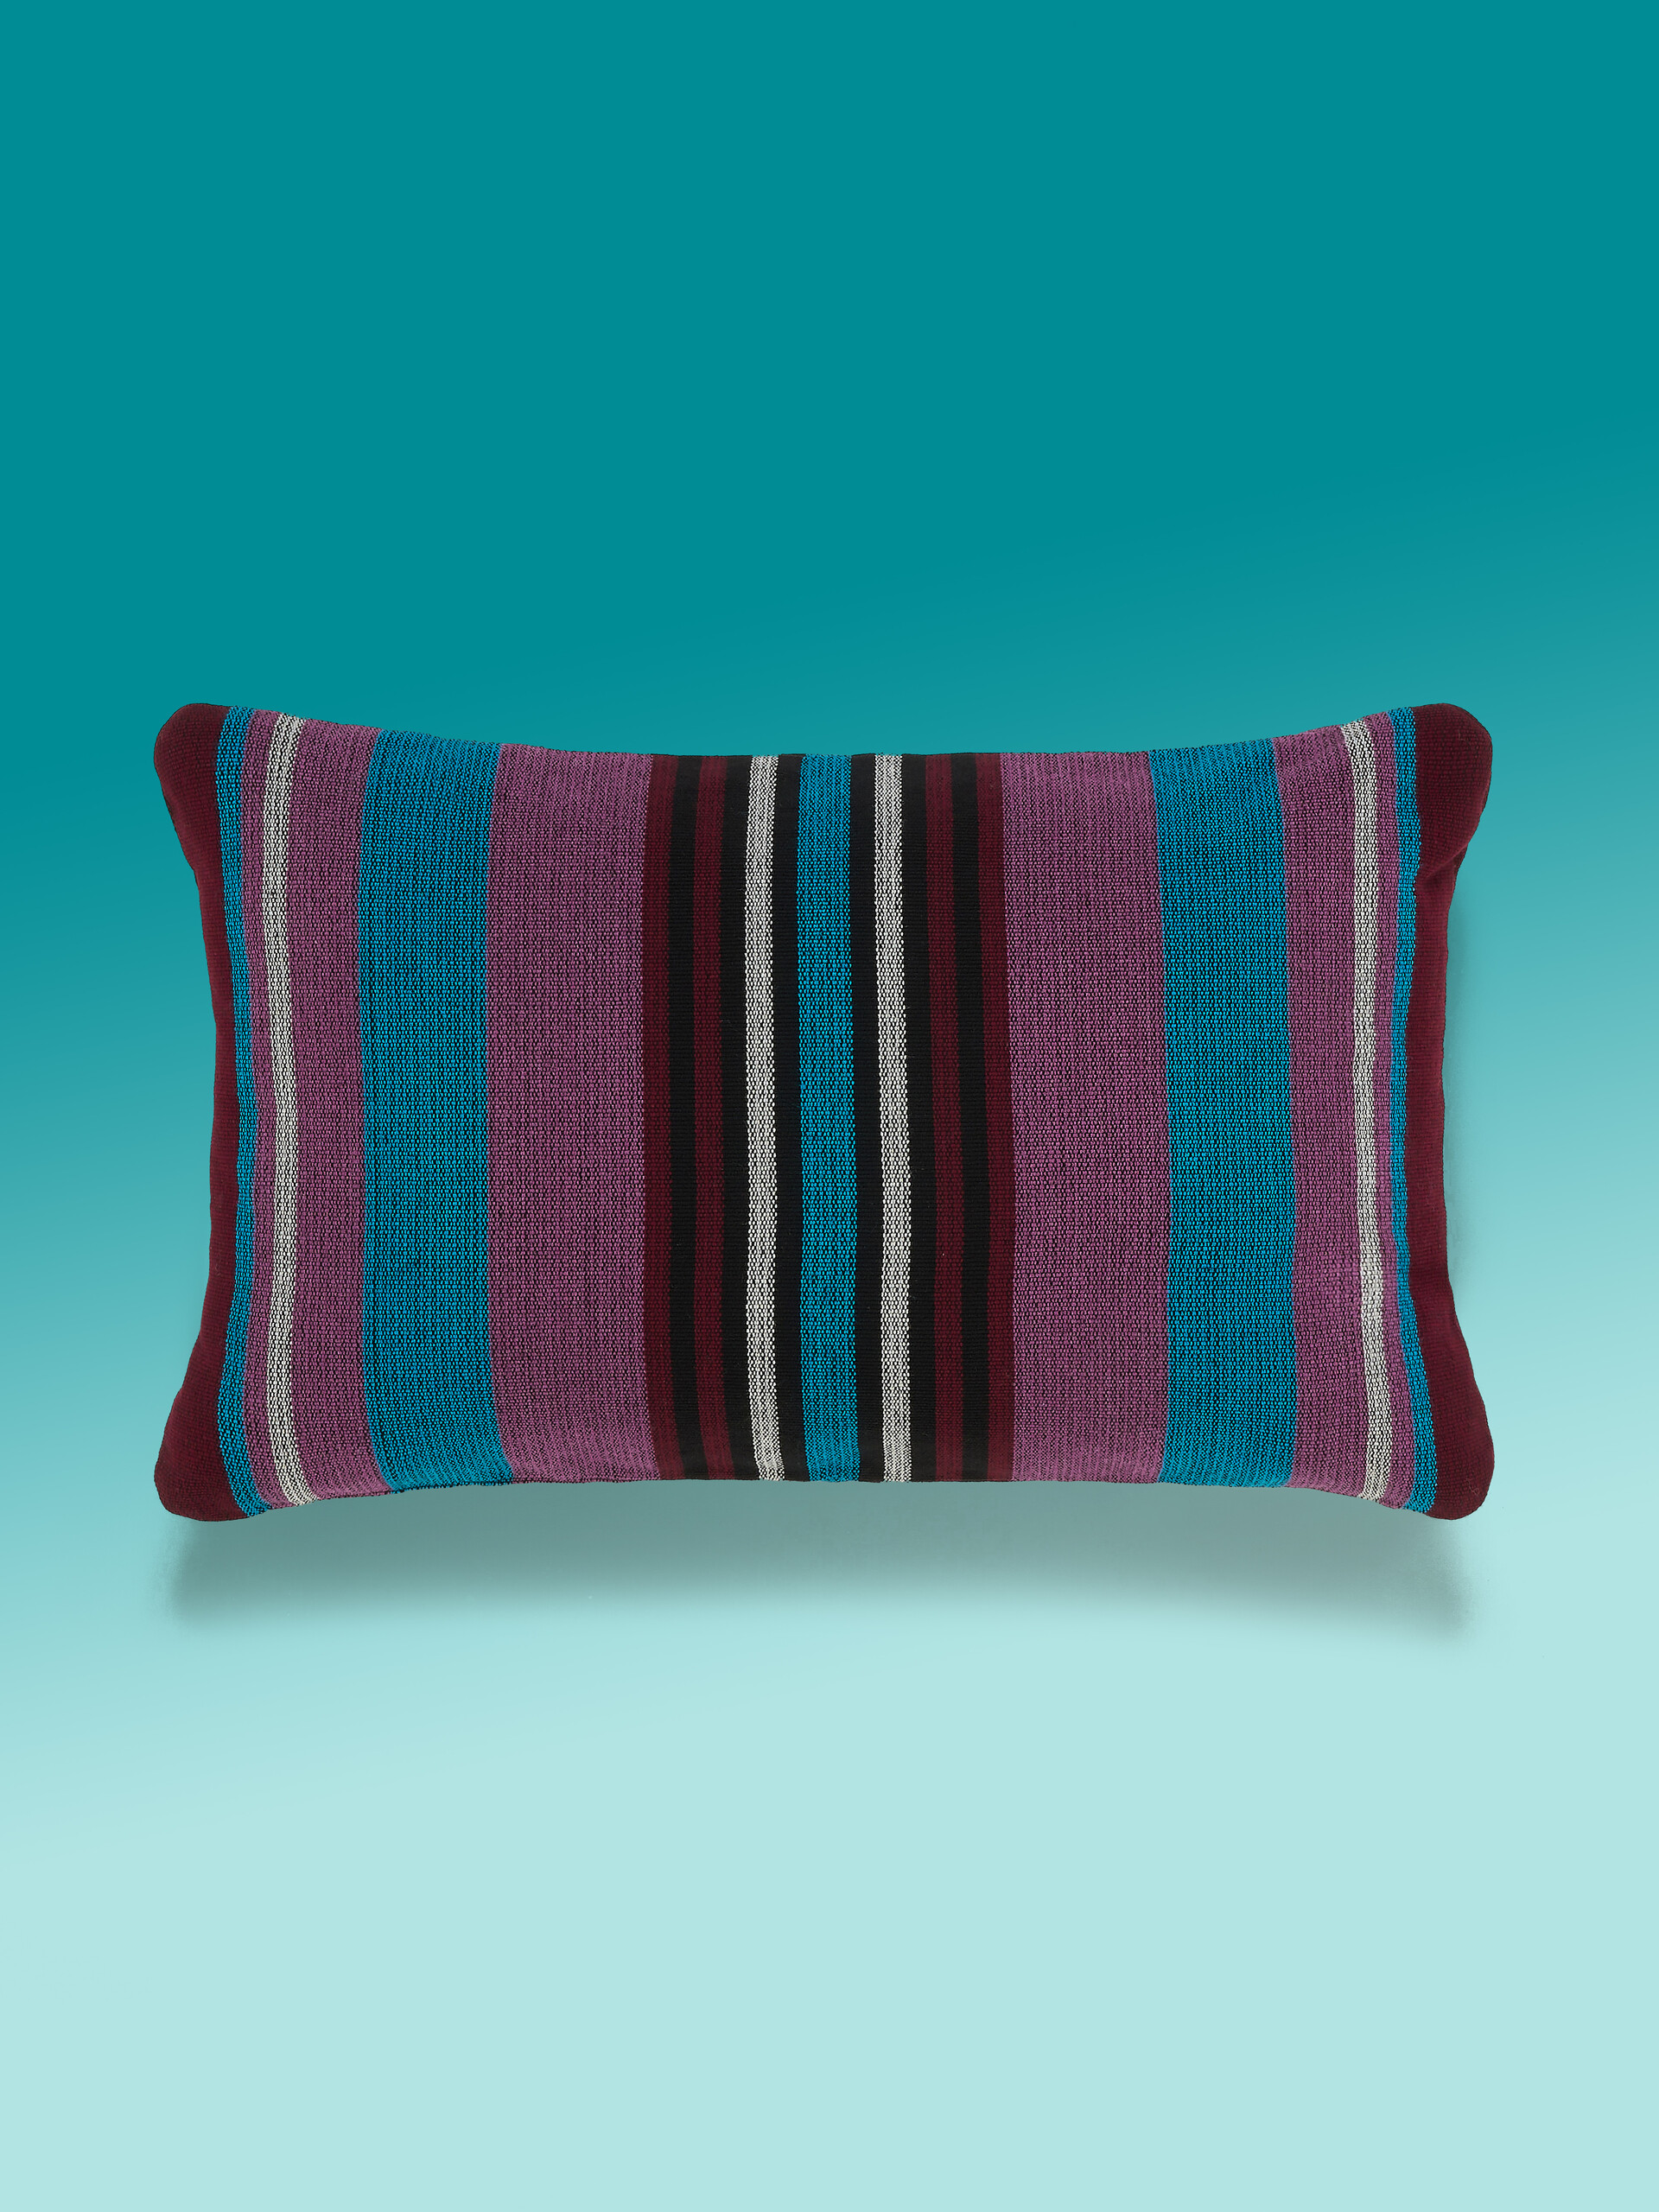 MARNI MARKET rectangular pillow cover in polyester with green burgundy and pale blue vertical stripes - Furniture - Image 1